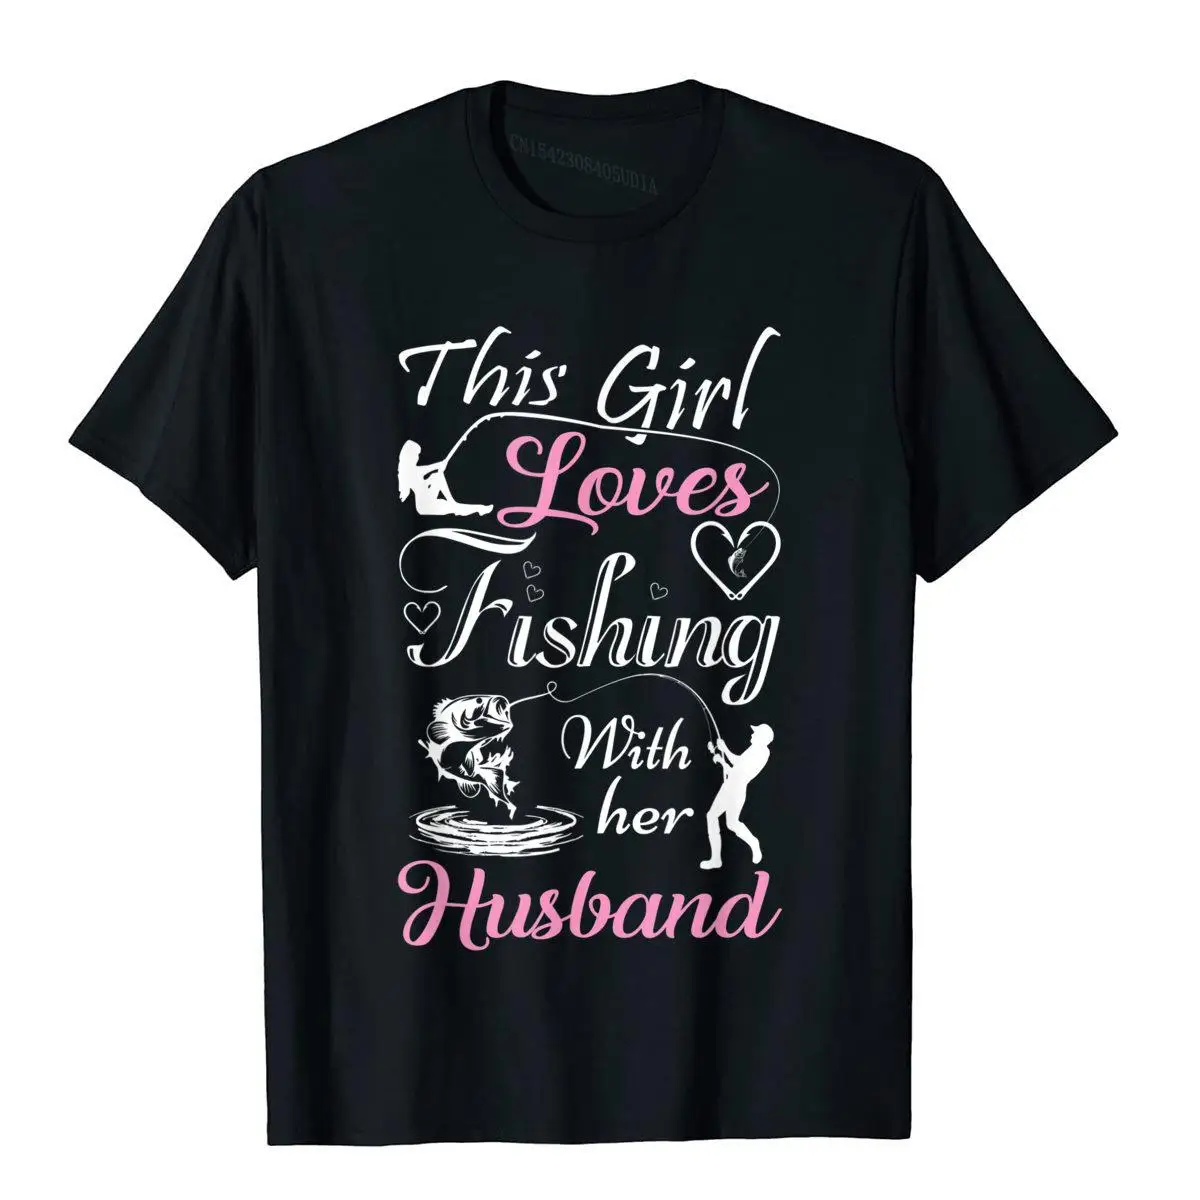 This Girl Loves Fishing With Her Husband Funny T Shirts__B13776black